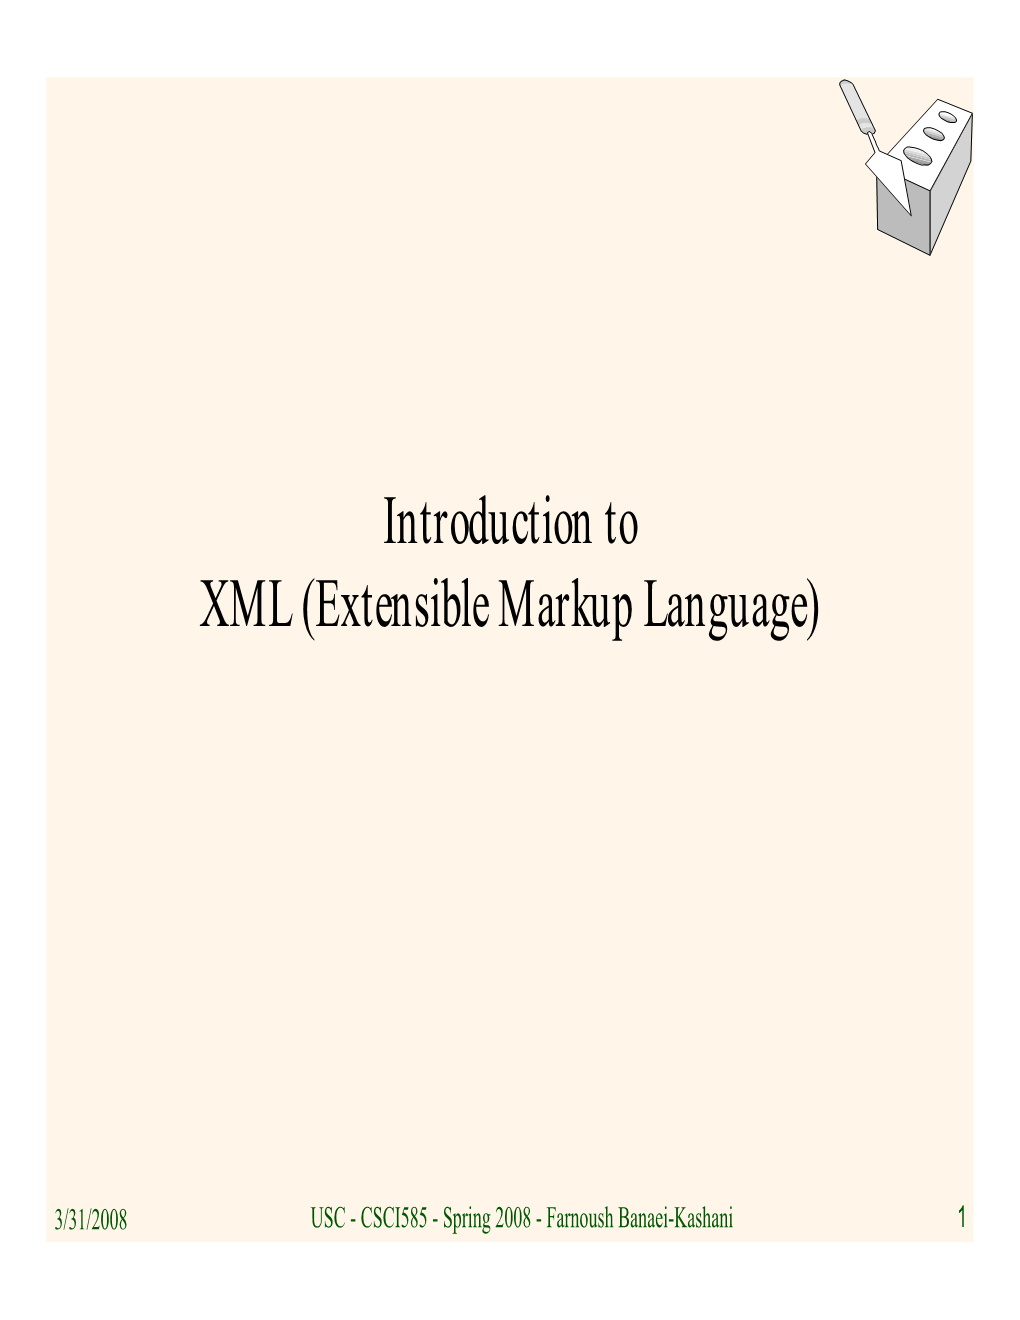 Introduction to XML (Extensible Markup Language)